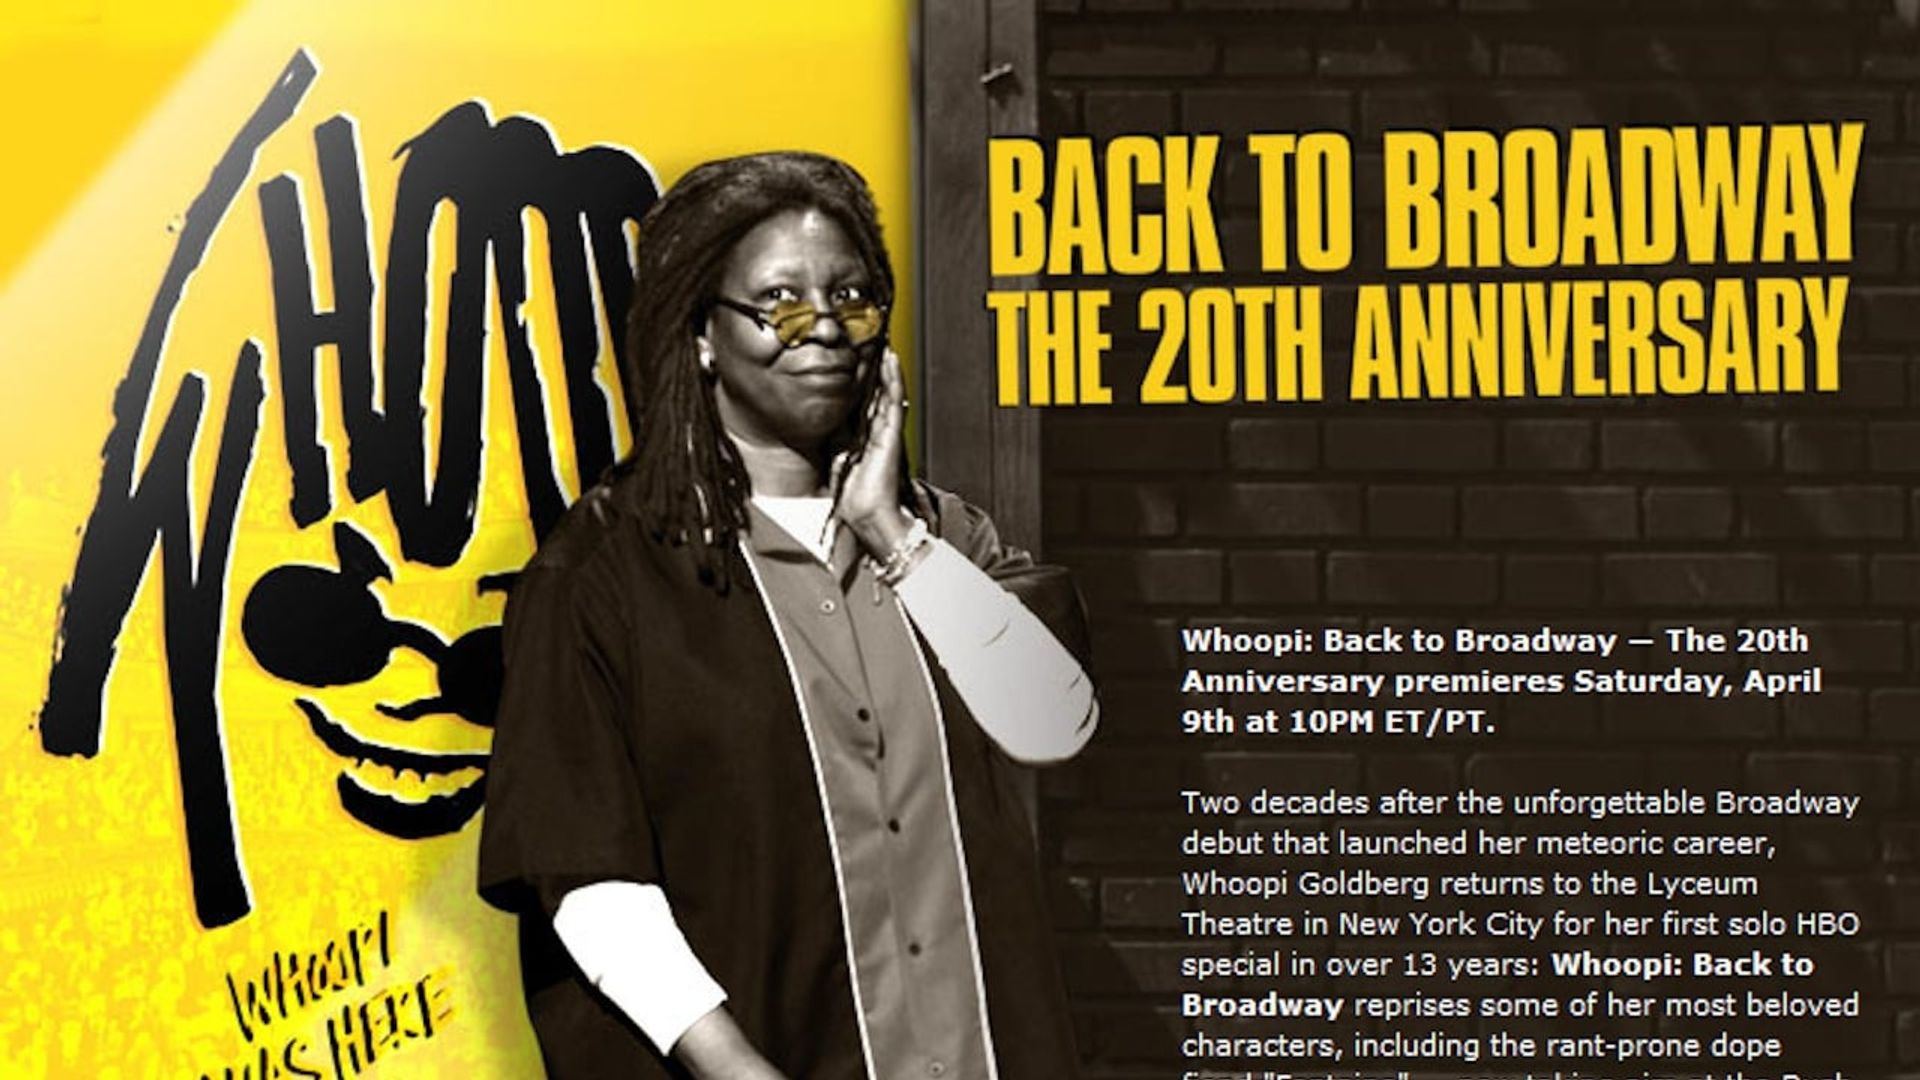 Whoopi: Back to Broadway - The 20th Anniversary background